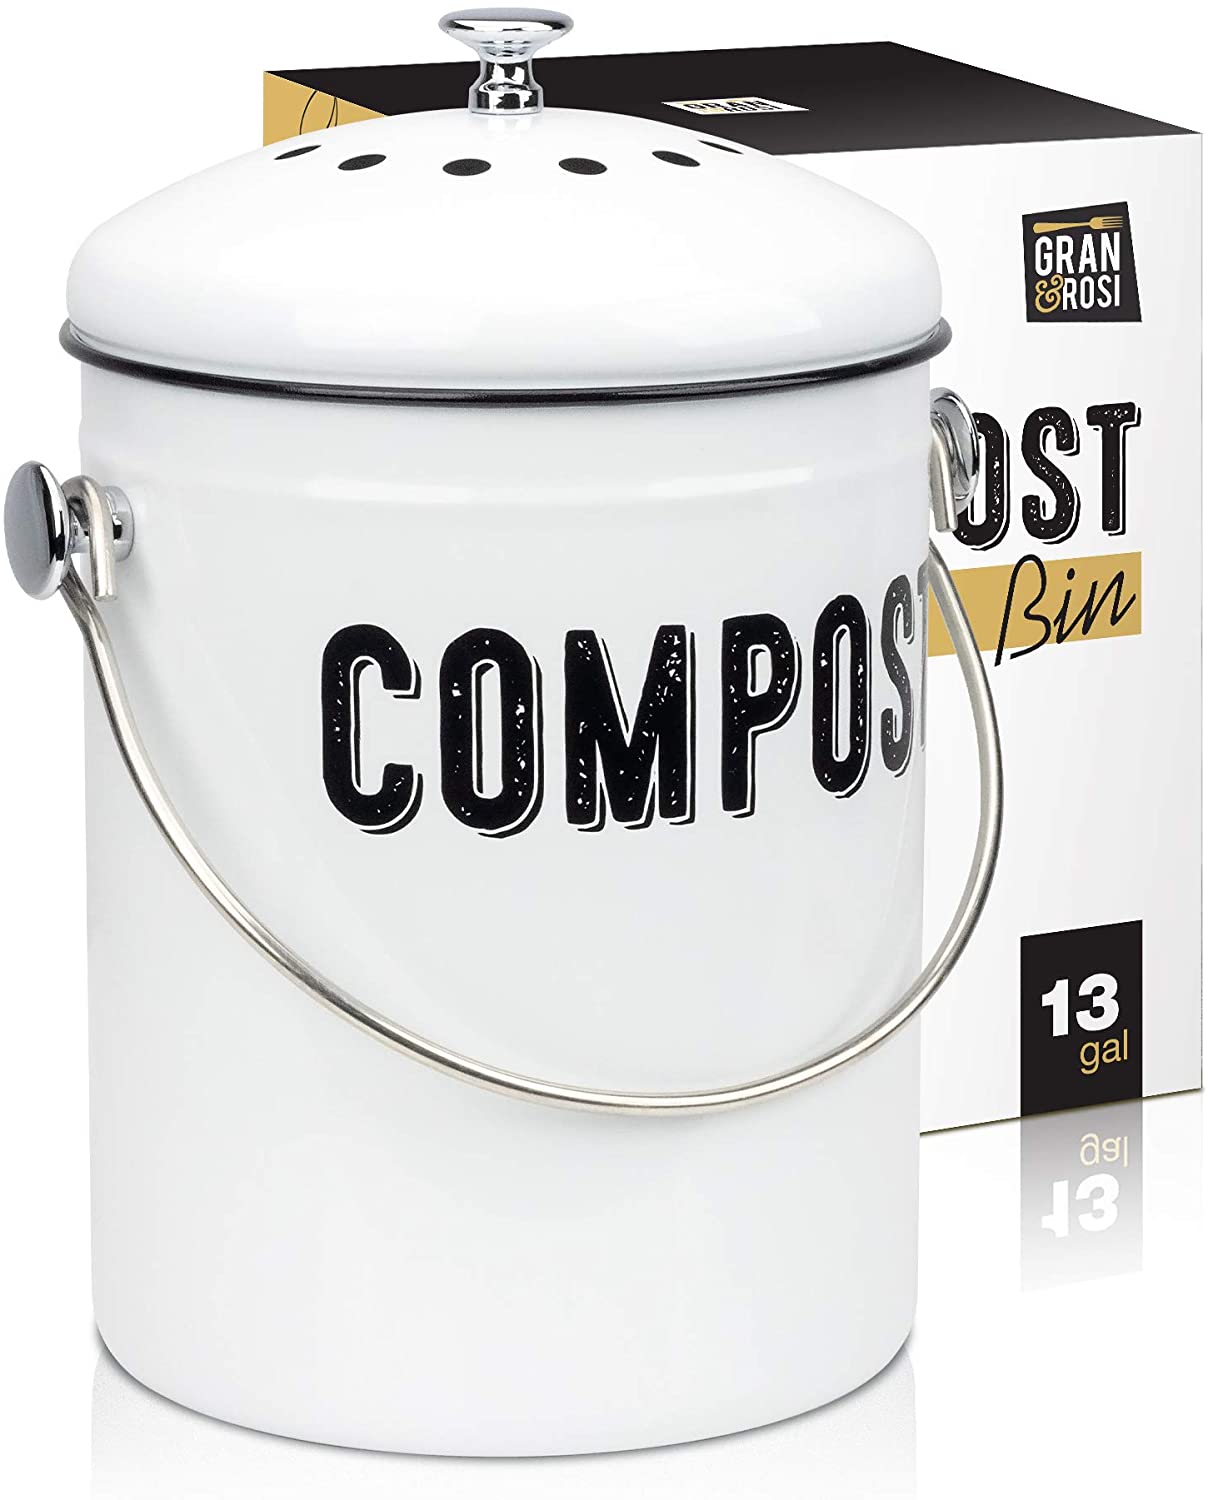 How to Choose the Best Kitchen Compost Bin for Your Needs